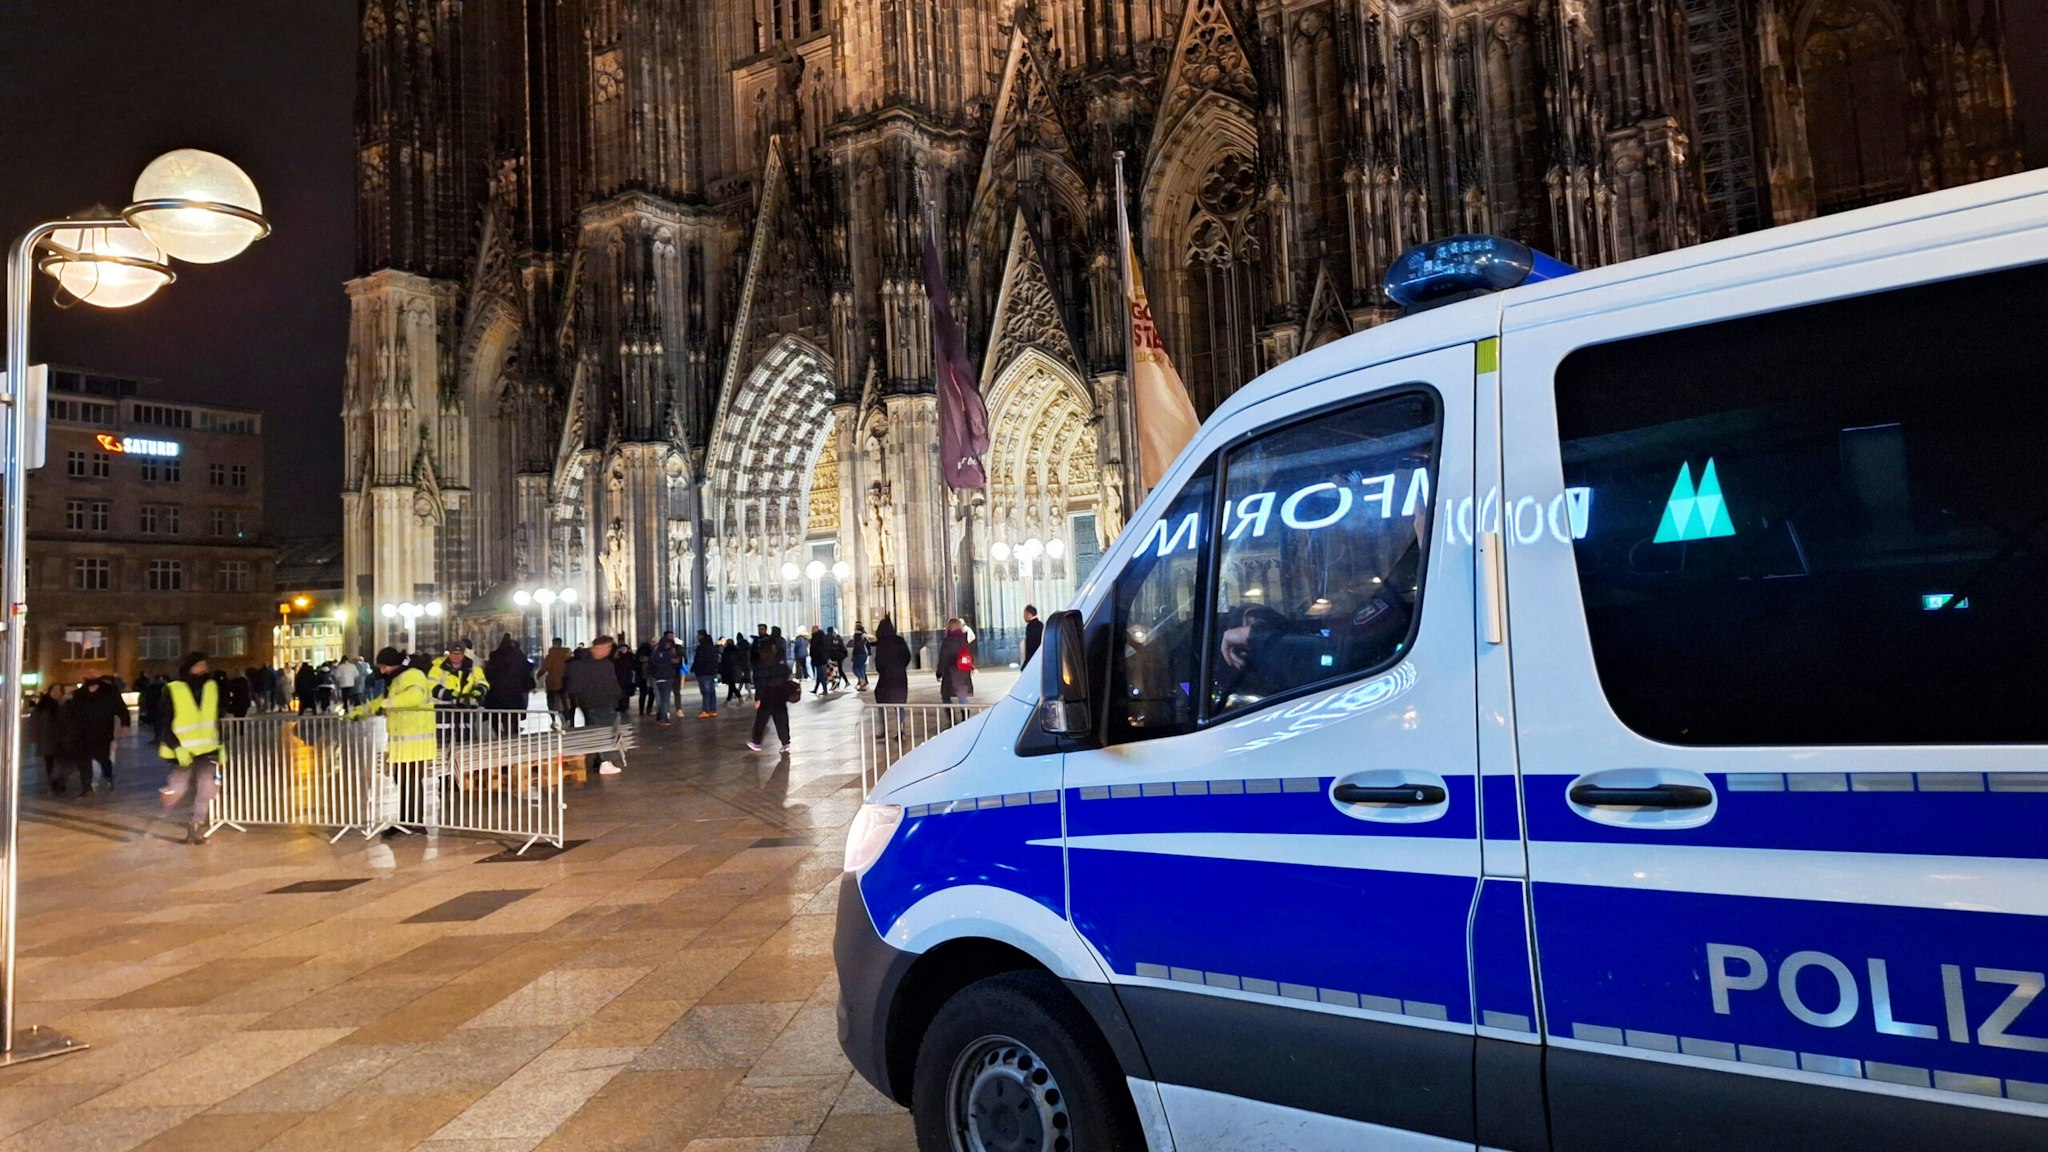 23 December 2023, North Rhine-Westphalia, Cologne: A police vehicle is parked in front of the cathedral. One day before Christmas, the police in Cologne are stepping up their protective measures due to possible plans for an attack. According to dpa, security authorities have received information about a possible plan by an Islamist group to attack Cologne Cathedral.